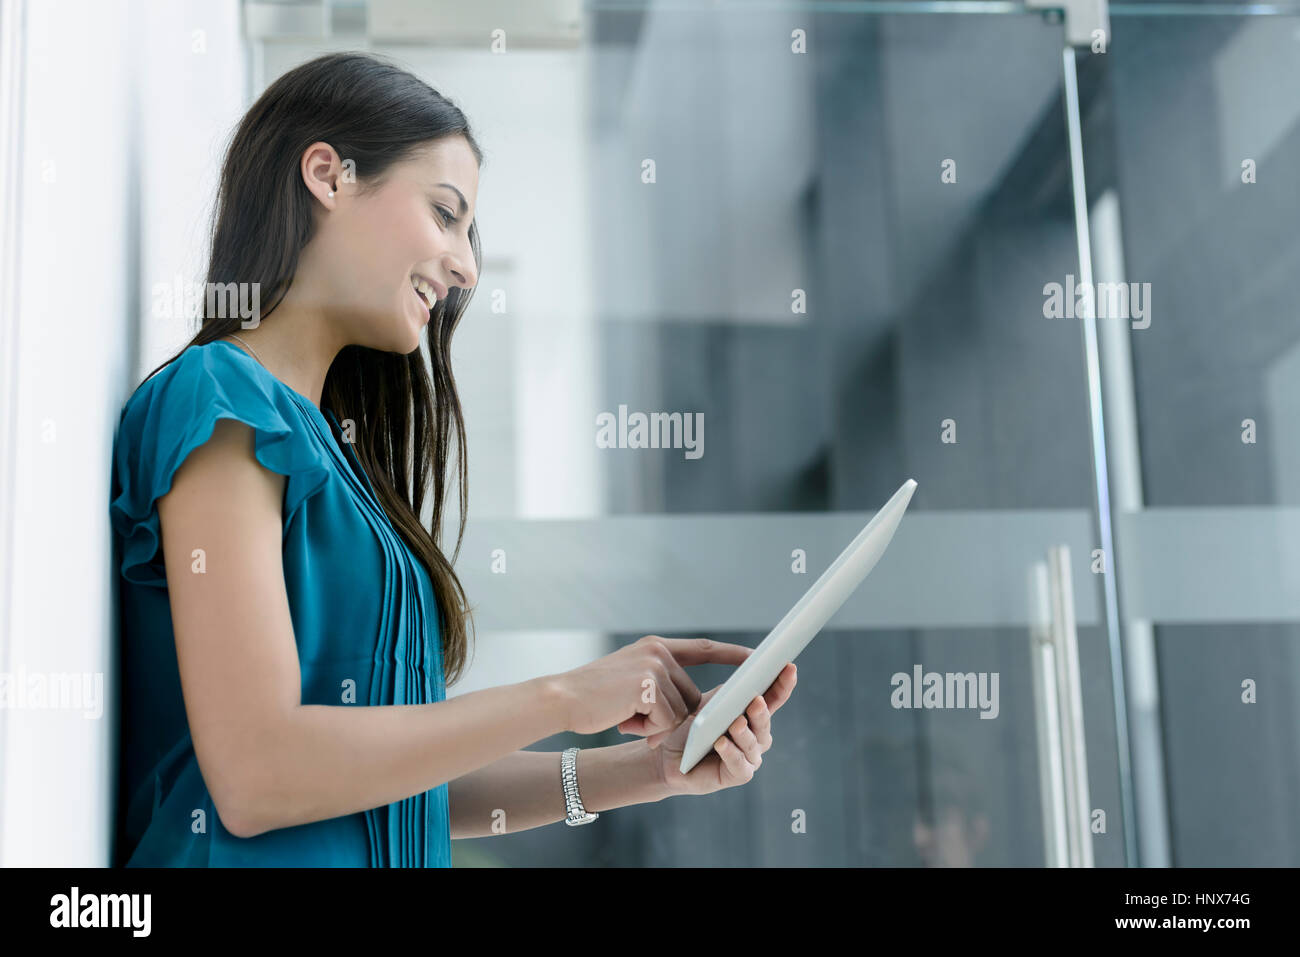 Window view of young businesswoman using digital tablet touchscreen at office entrance Stock Photo